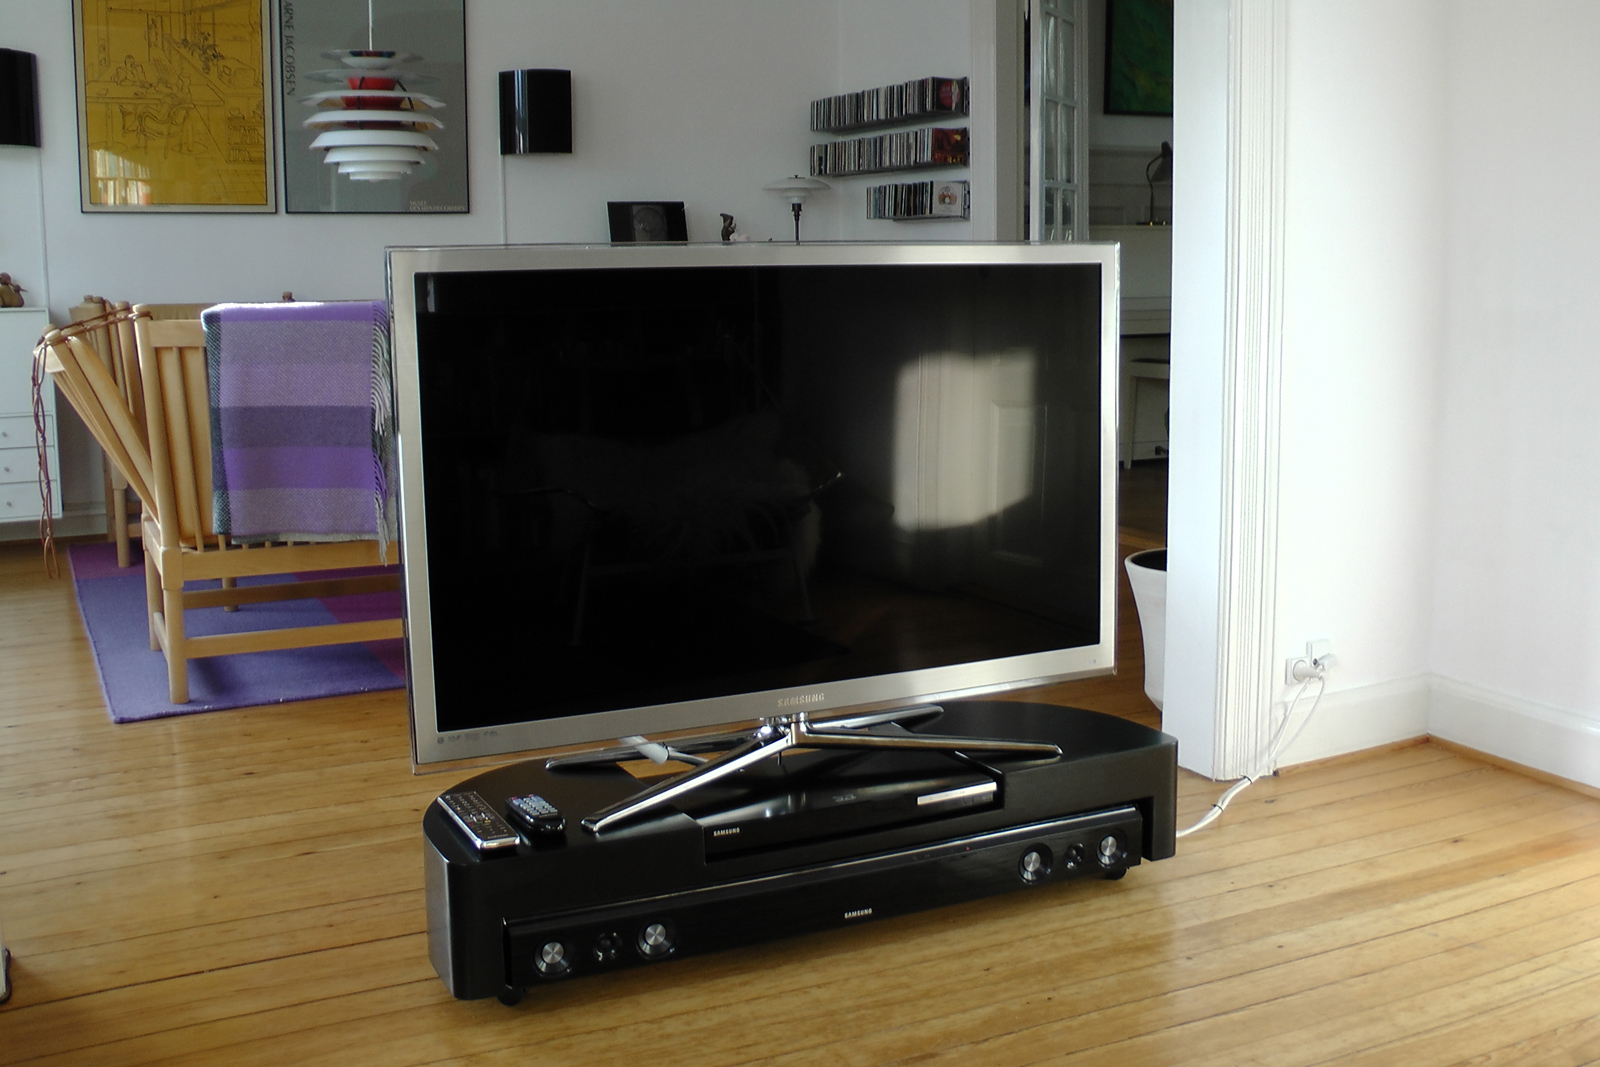 The TV stand in one of our living rooms.